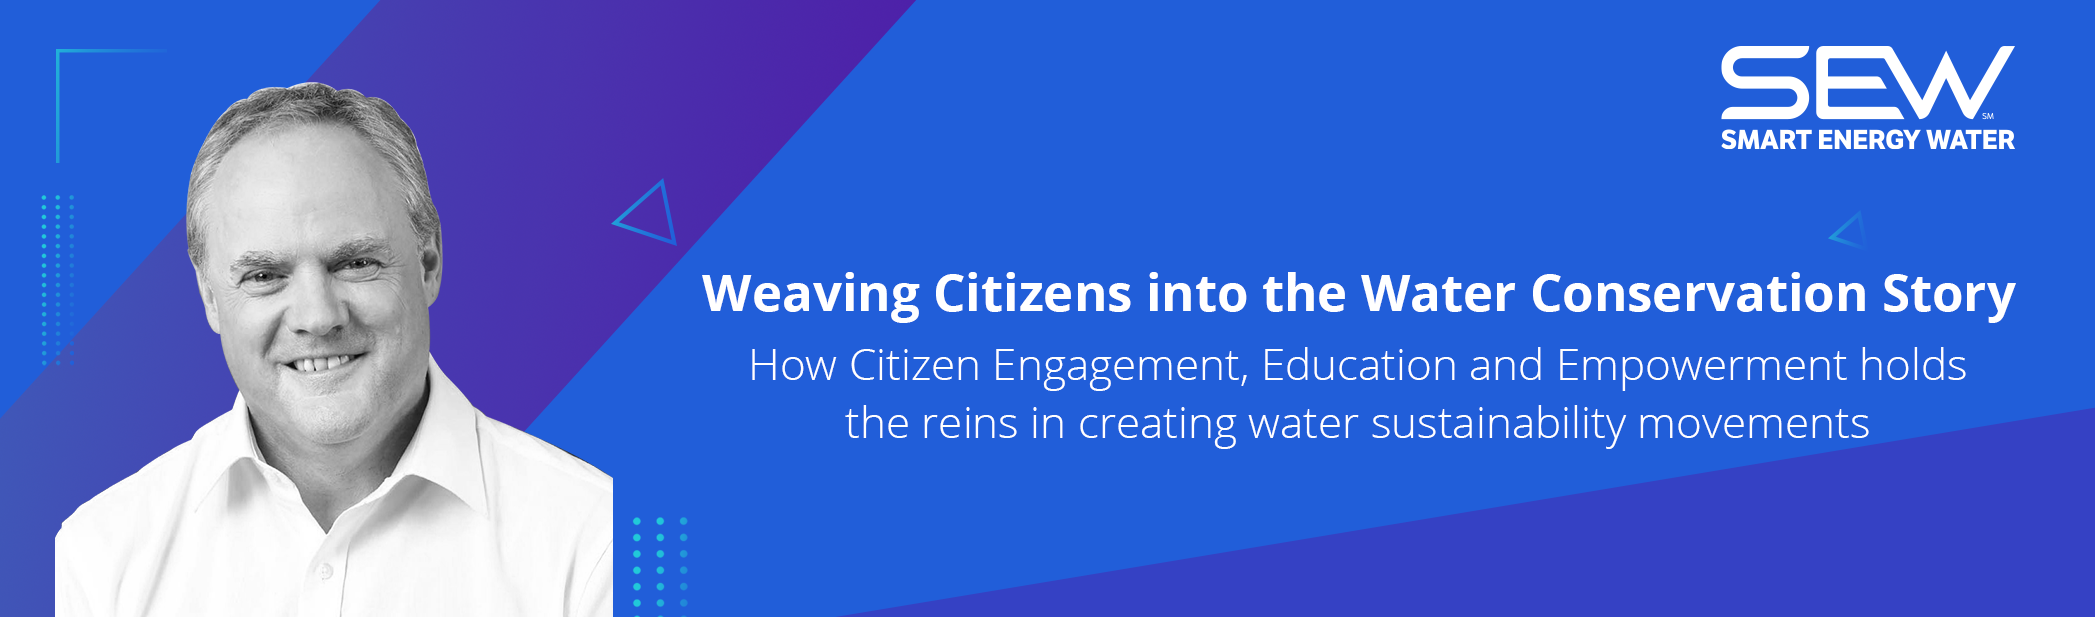 Weaving Citizens into the Water Conservation Story